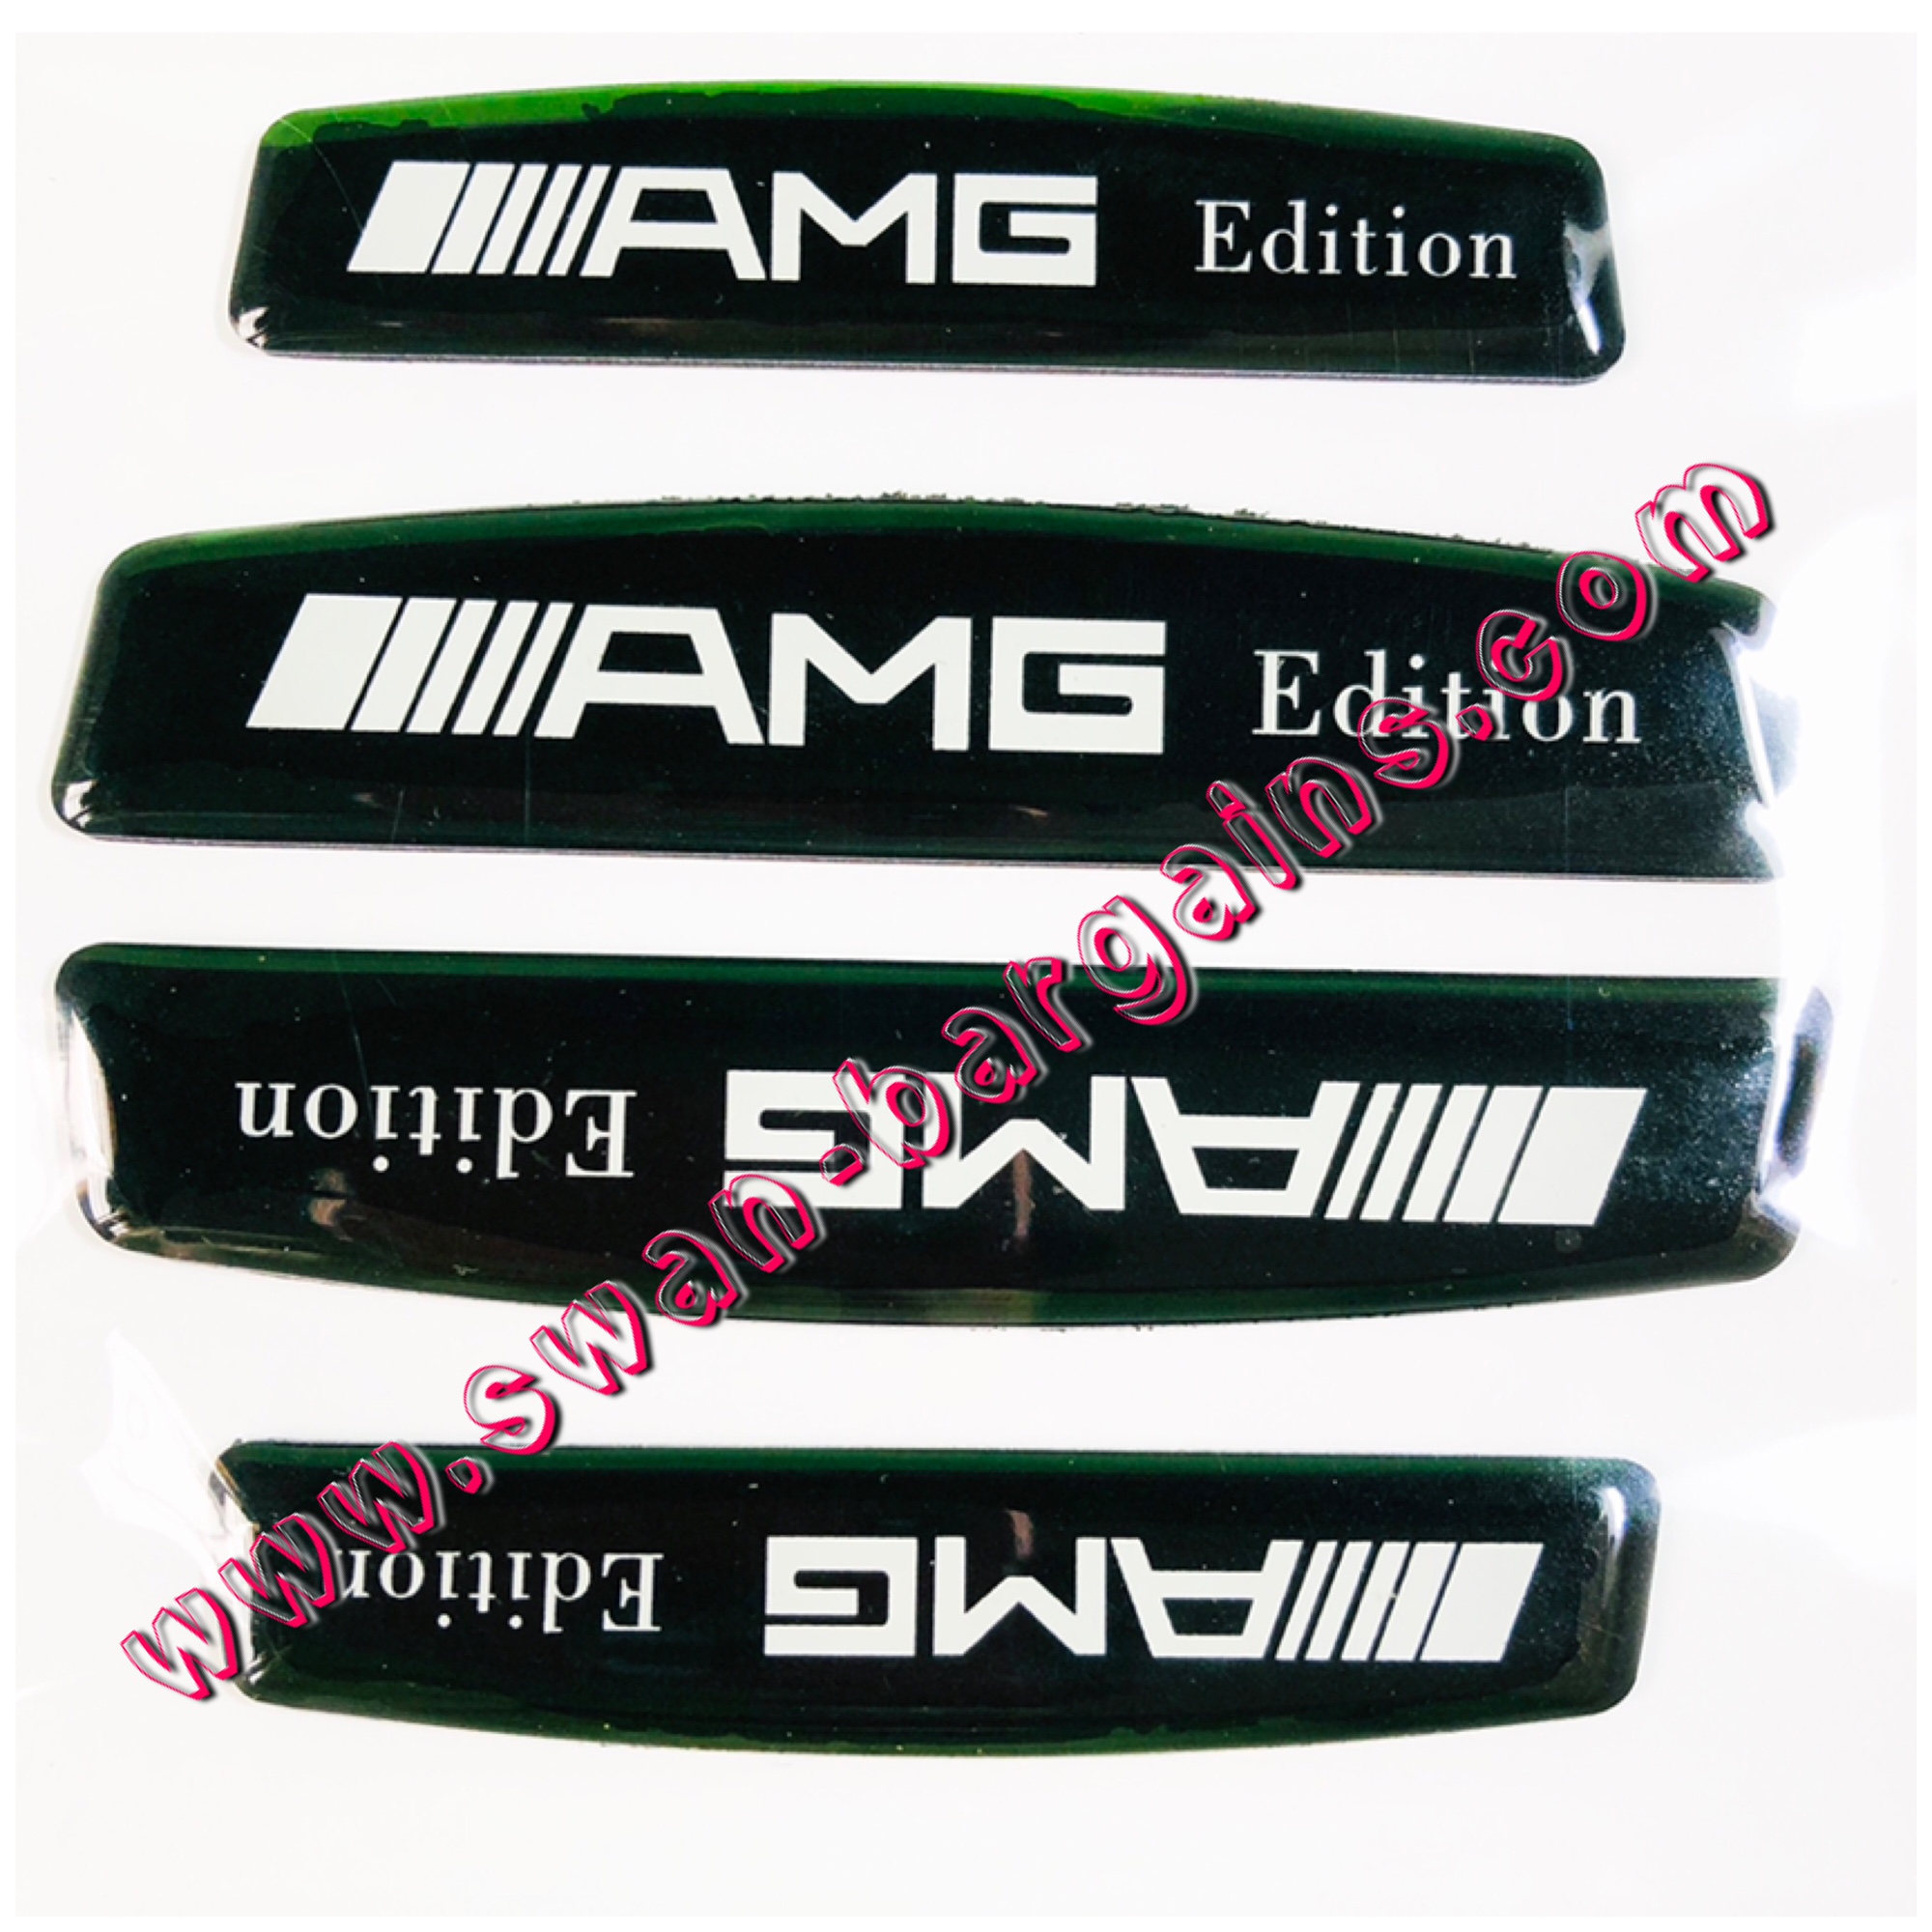 Mercedes AMG Door Lining Anti-Collision Protector Guard Strip Singapore